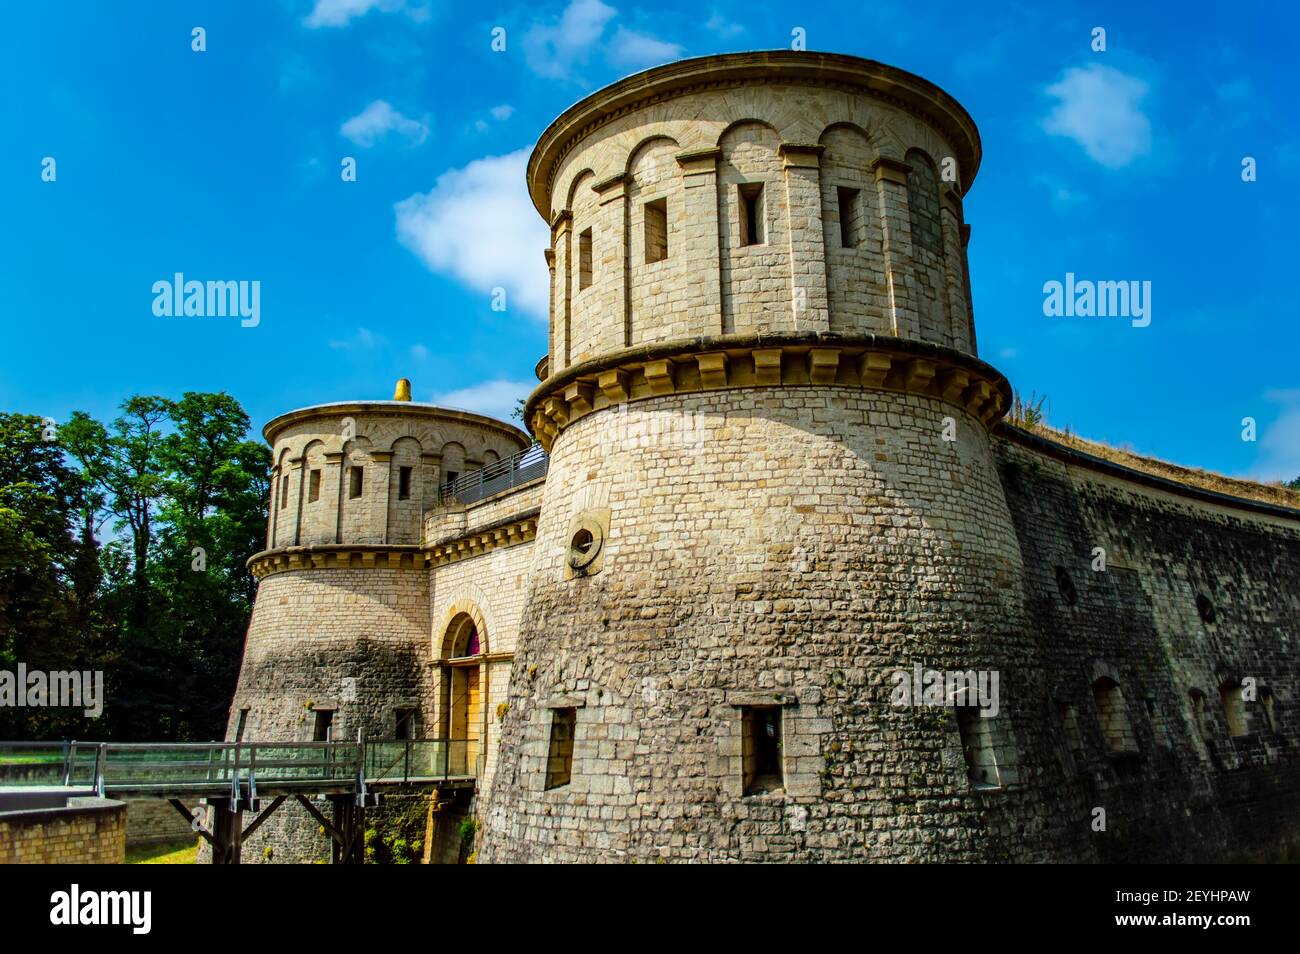 Luxembourg city, Luxembourg - July 15, 2019: Fort Thungen known as Three Acorns fortress, a famous medieval fortification in Luxembourg city Stock Photo